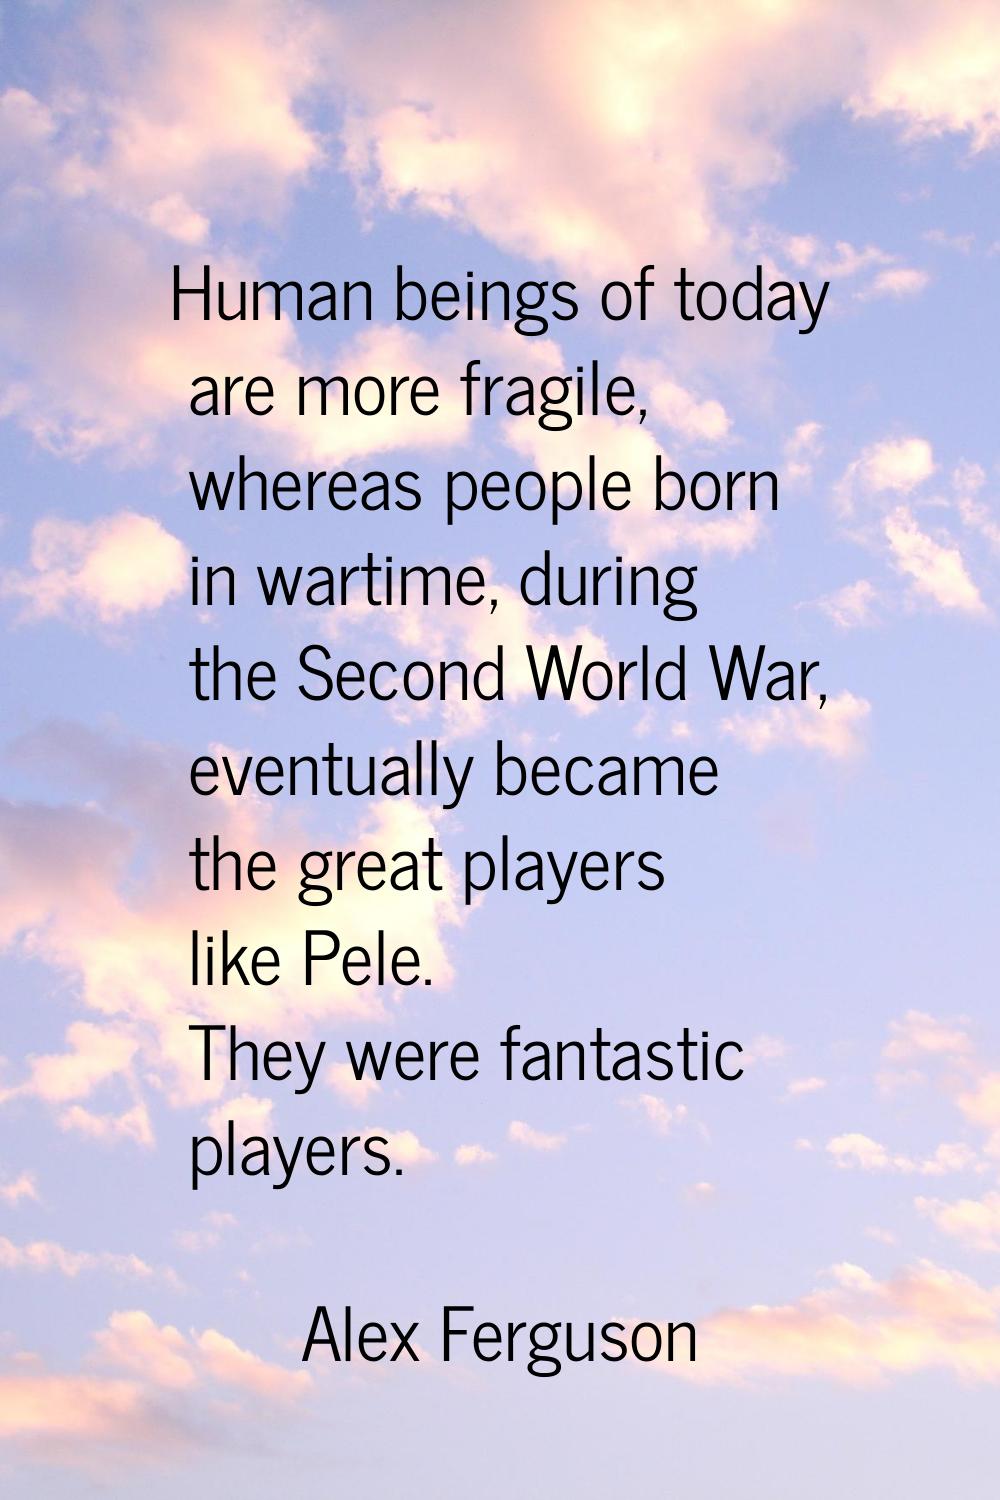 Human beings of today are more fragile, whereas people born in wartime, during the Second World War